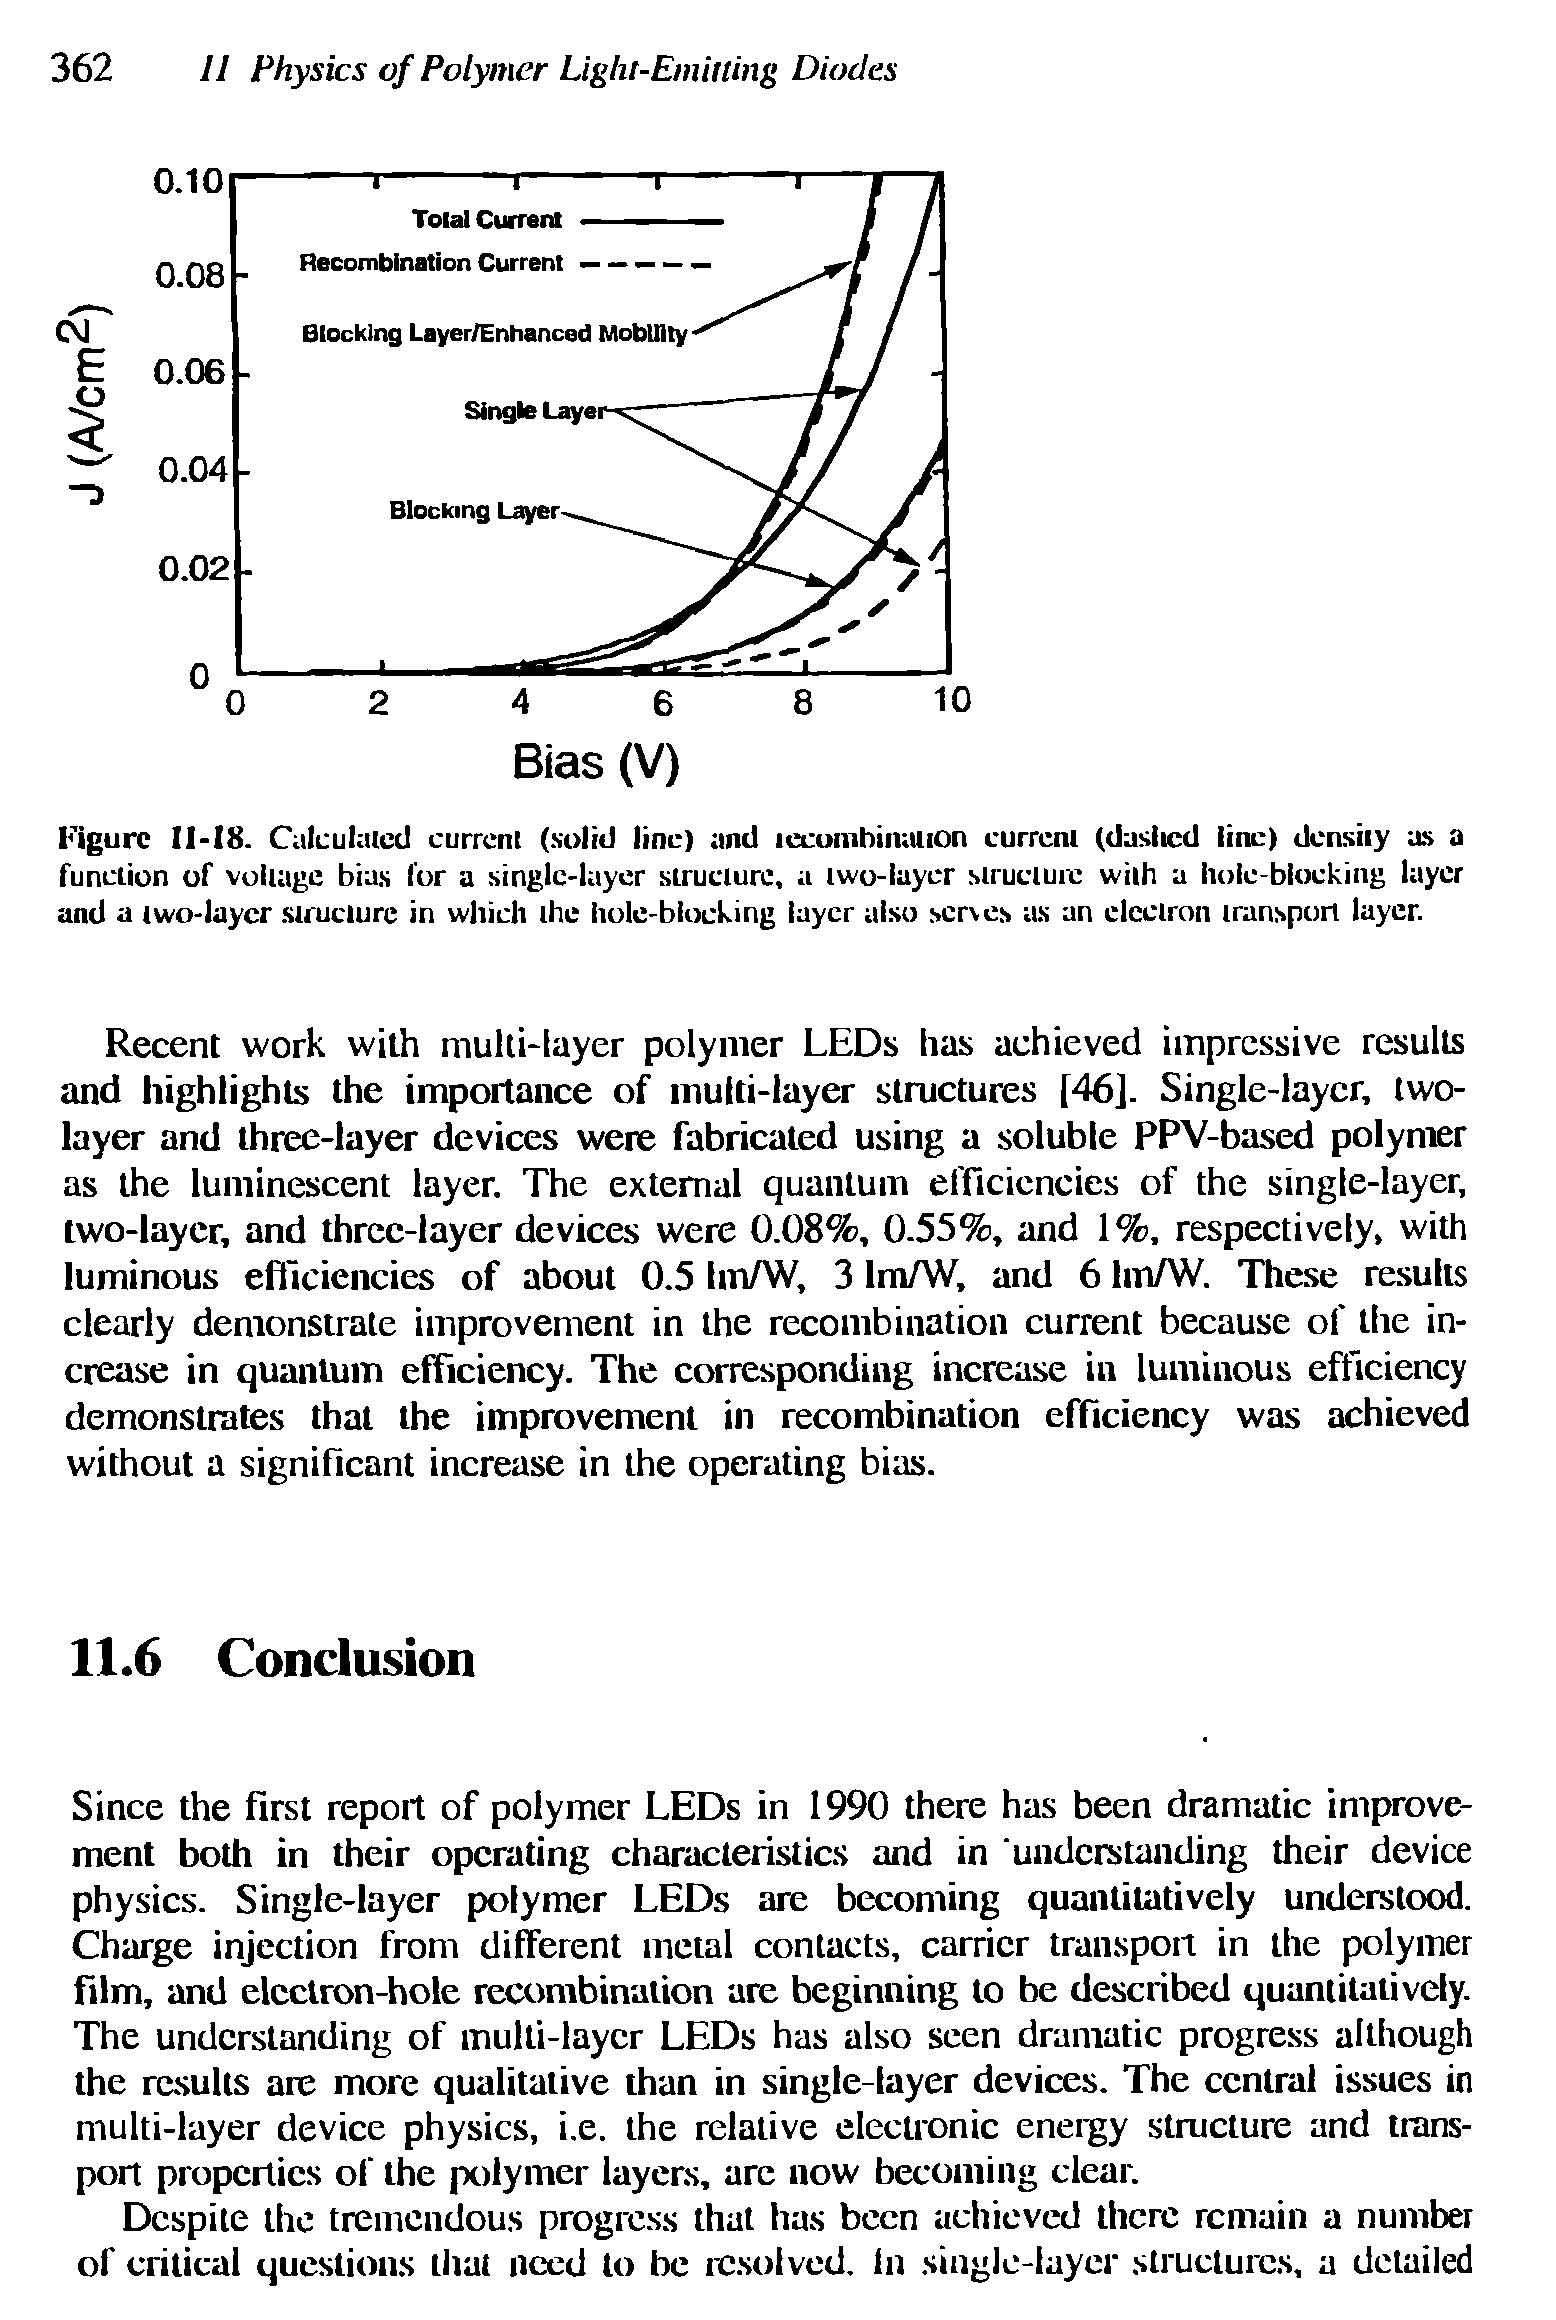 Figure 11-18. Calculated current (solid line) and iccuinbiiuuion current (dashed line) density as a function of voltage bias for a single-layer structure, a two-layer structure with a hole-blocking layer and a two-layer structure in which the hole-blocking layer also serves as an electron transport layer.